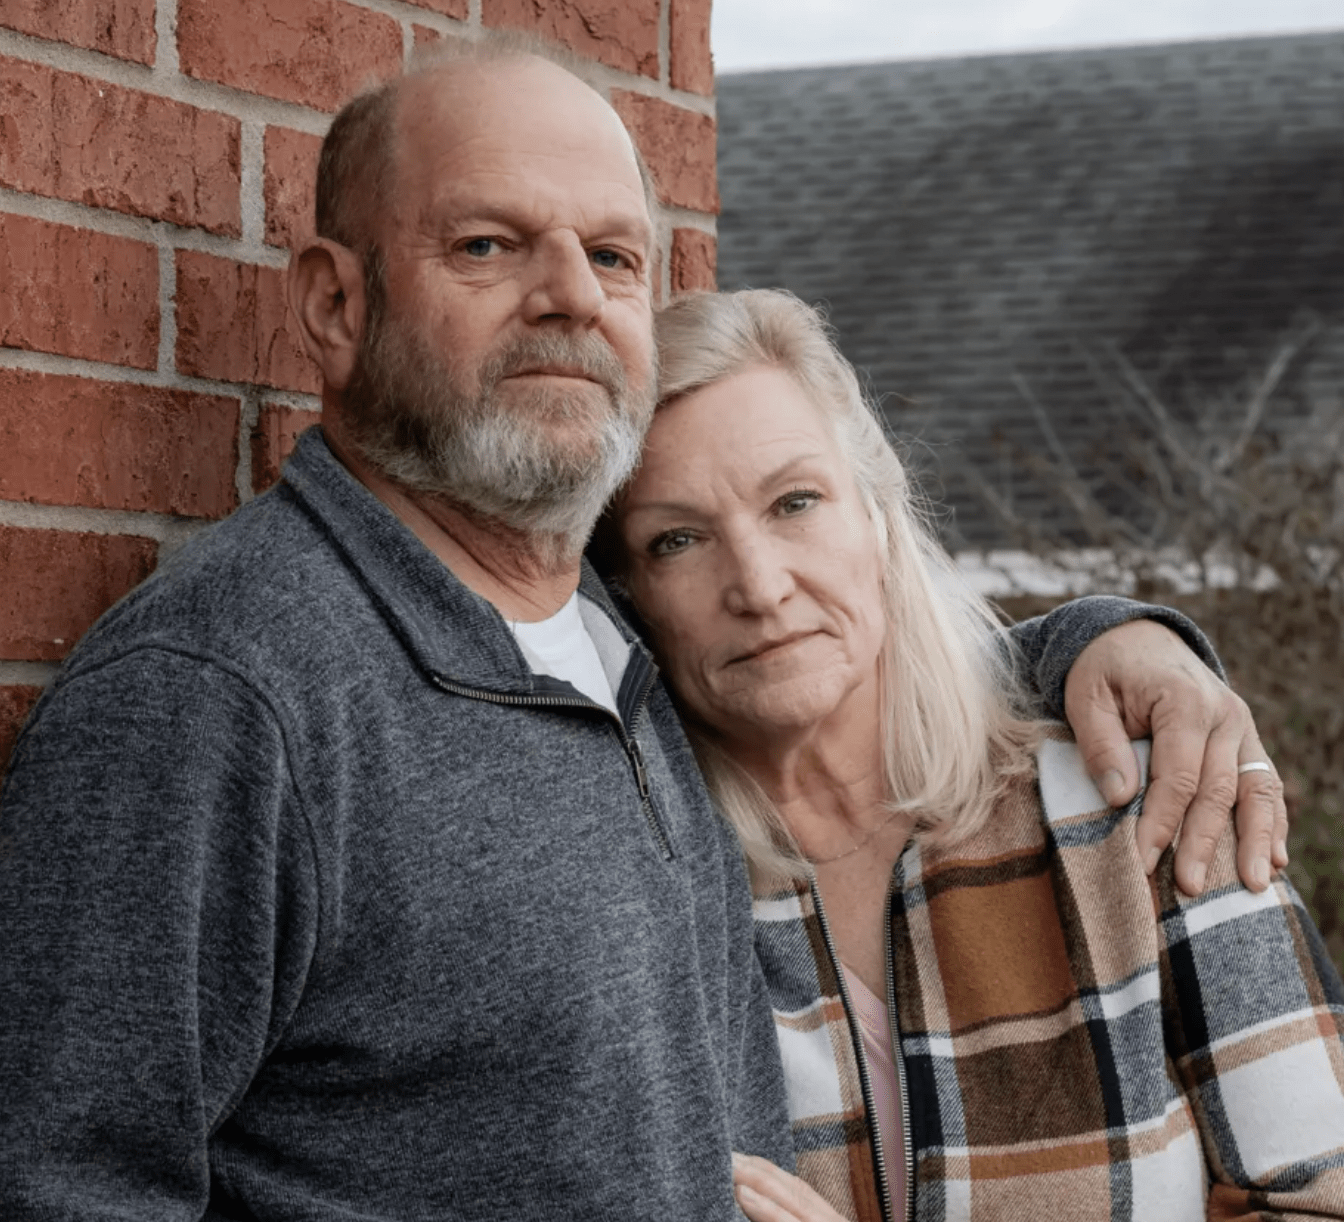 Marine Corps veteran Ron Winters and his wife, Teresa, at their home in Durant, Oklahoma. When Winters found out in August 2022 that he had bladder cancer, he braced for the fight of his life. But he says prior authorization created multiple obstacles that delayed care, including surgery. Winters says his cancer has advanced to stage 4. (DESIREE RIOS FOR KFF HEALTH NEWS)